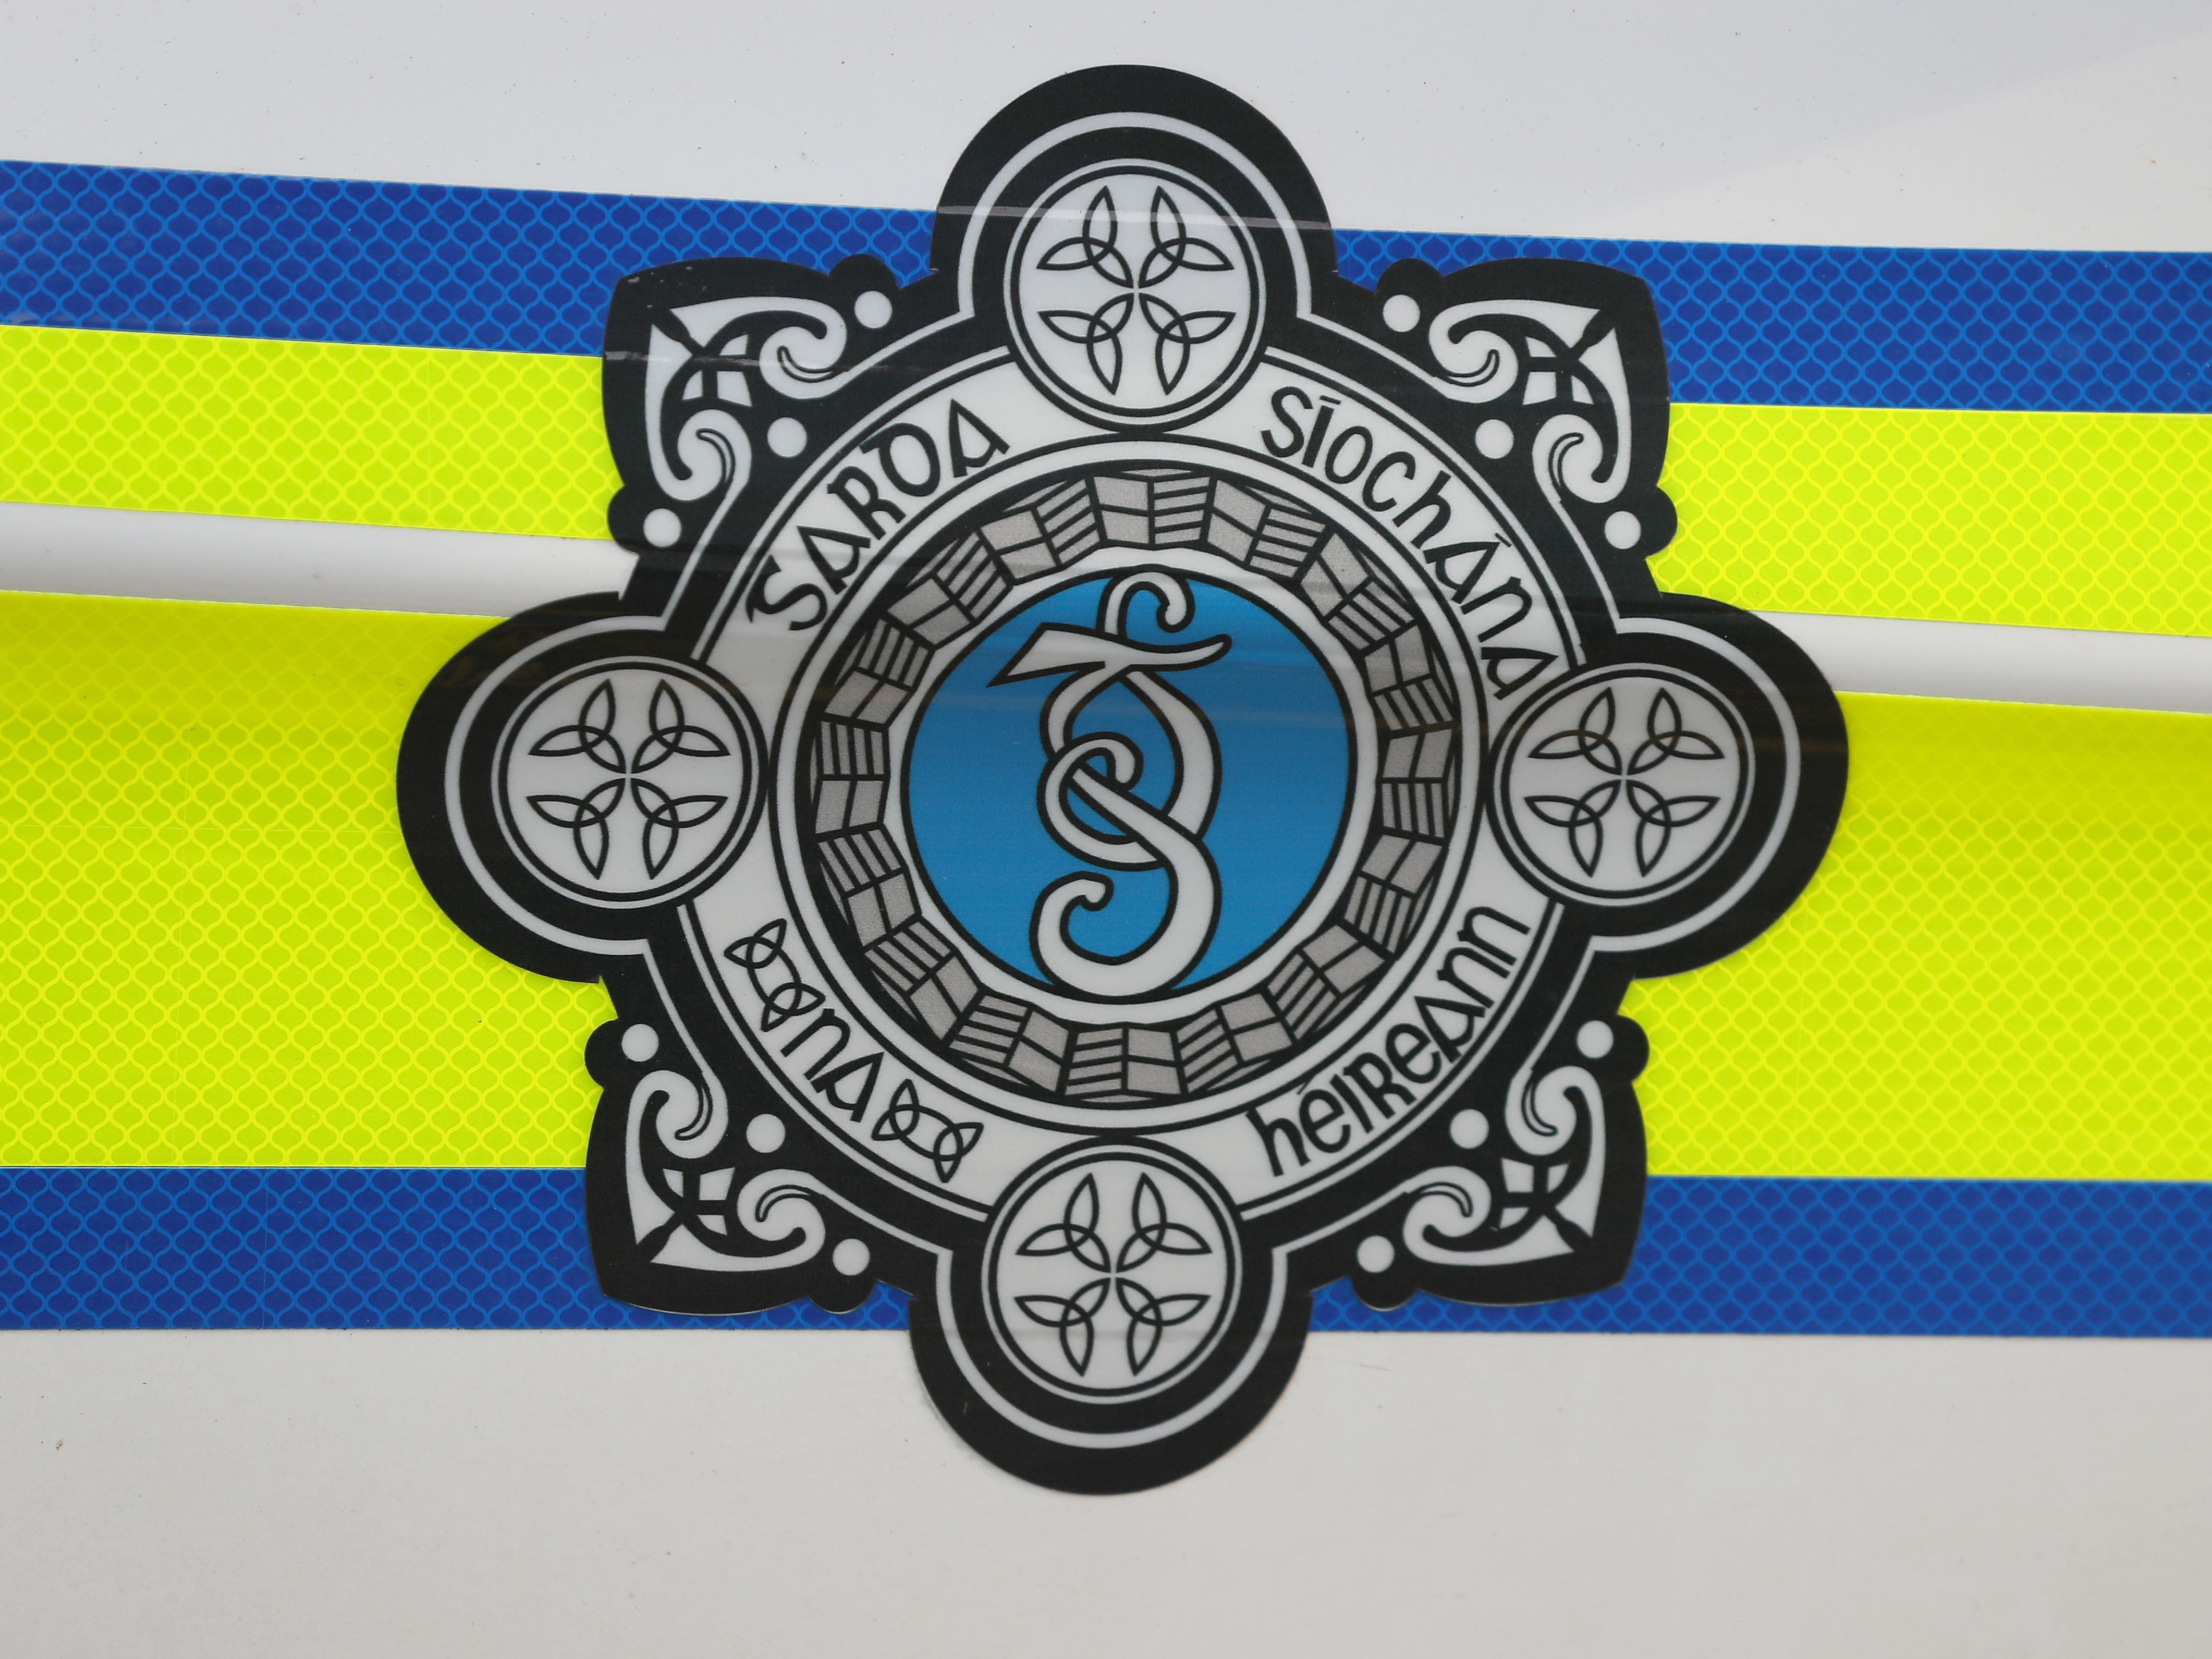 ‘Several casualties’ after helicopter crash in Co Westmeath